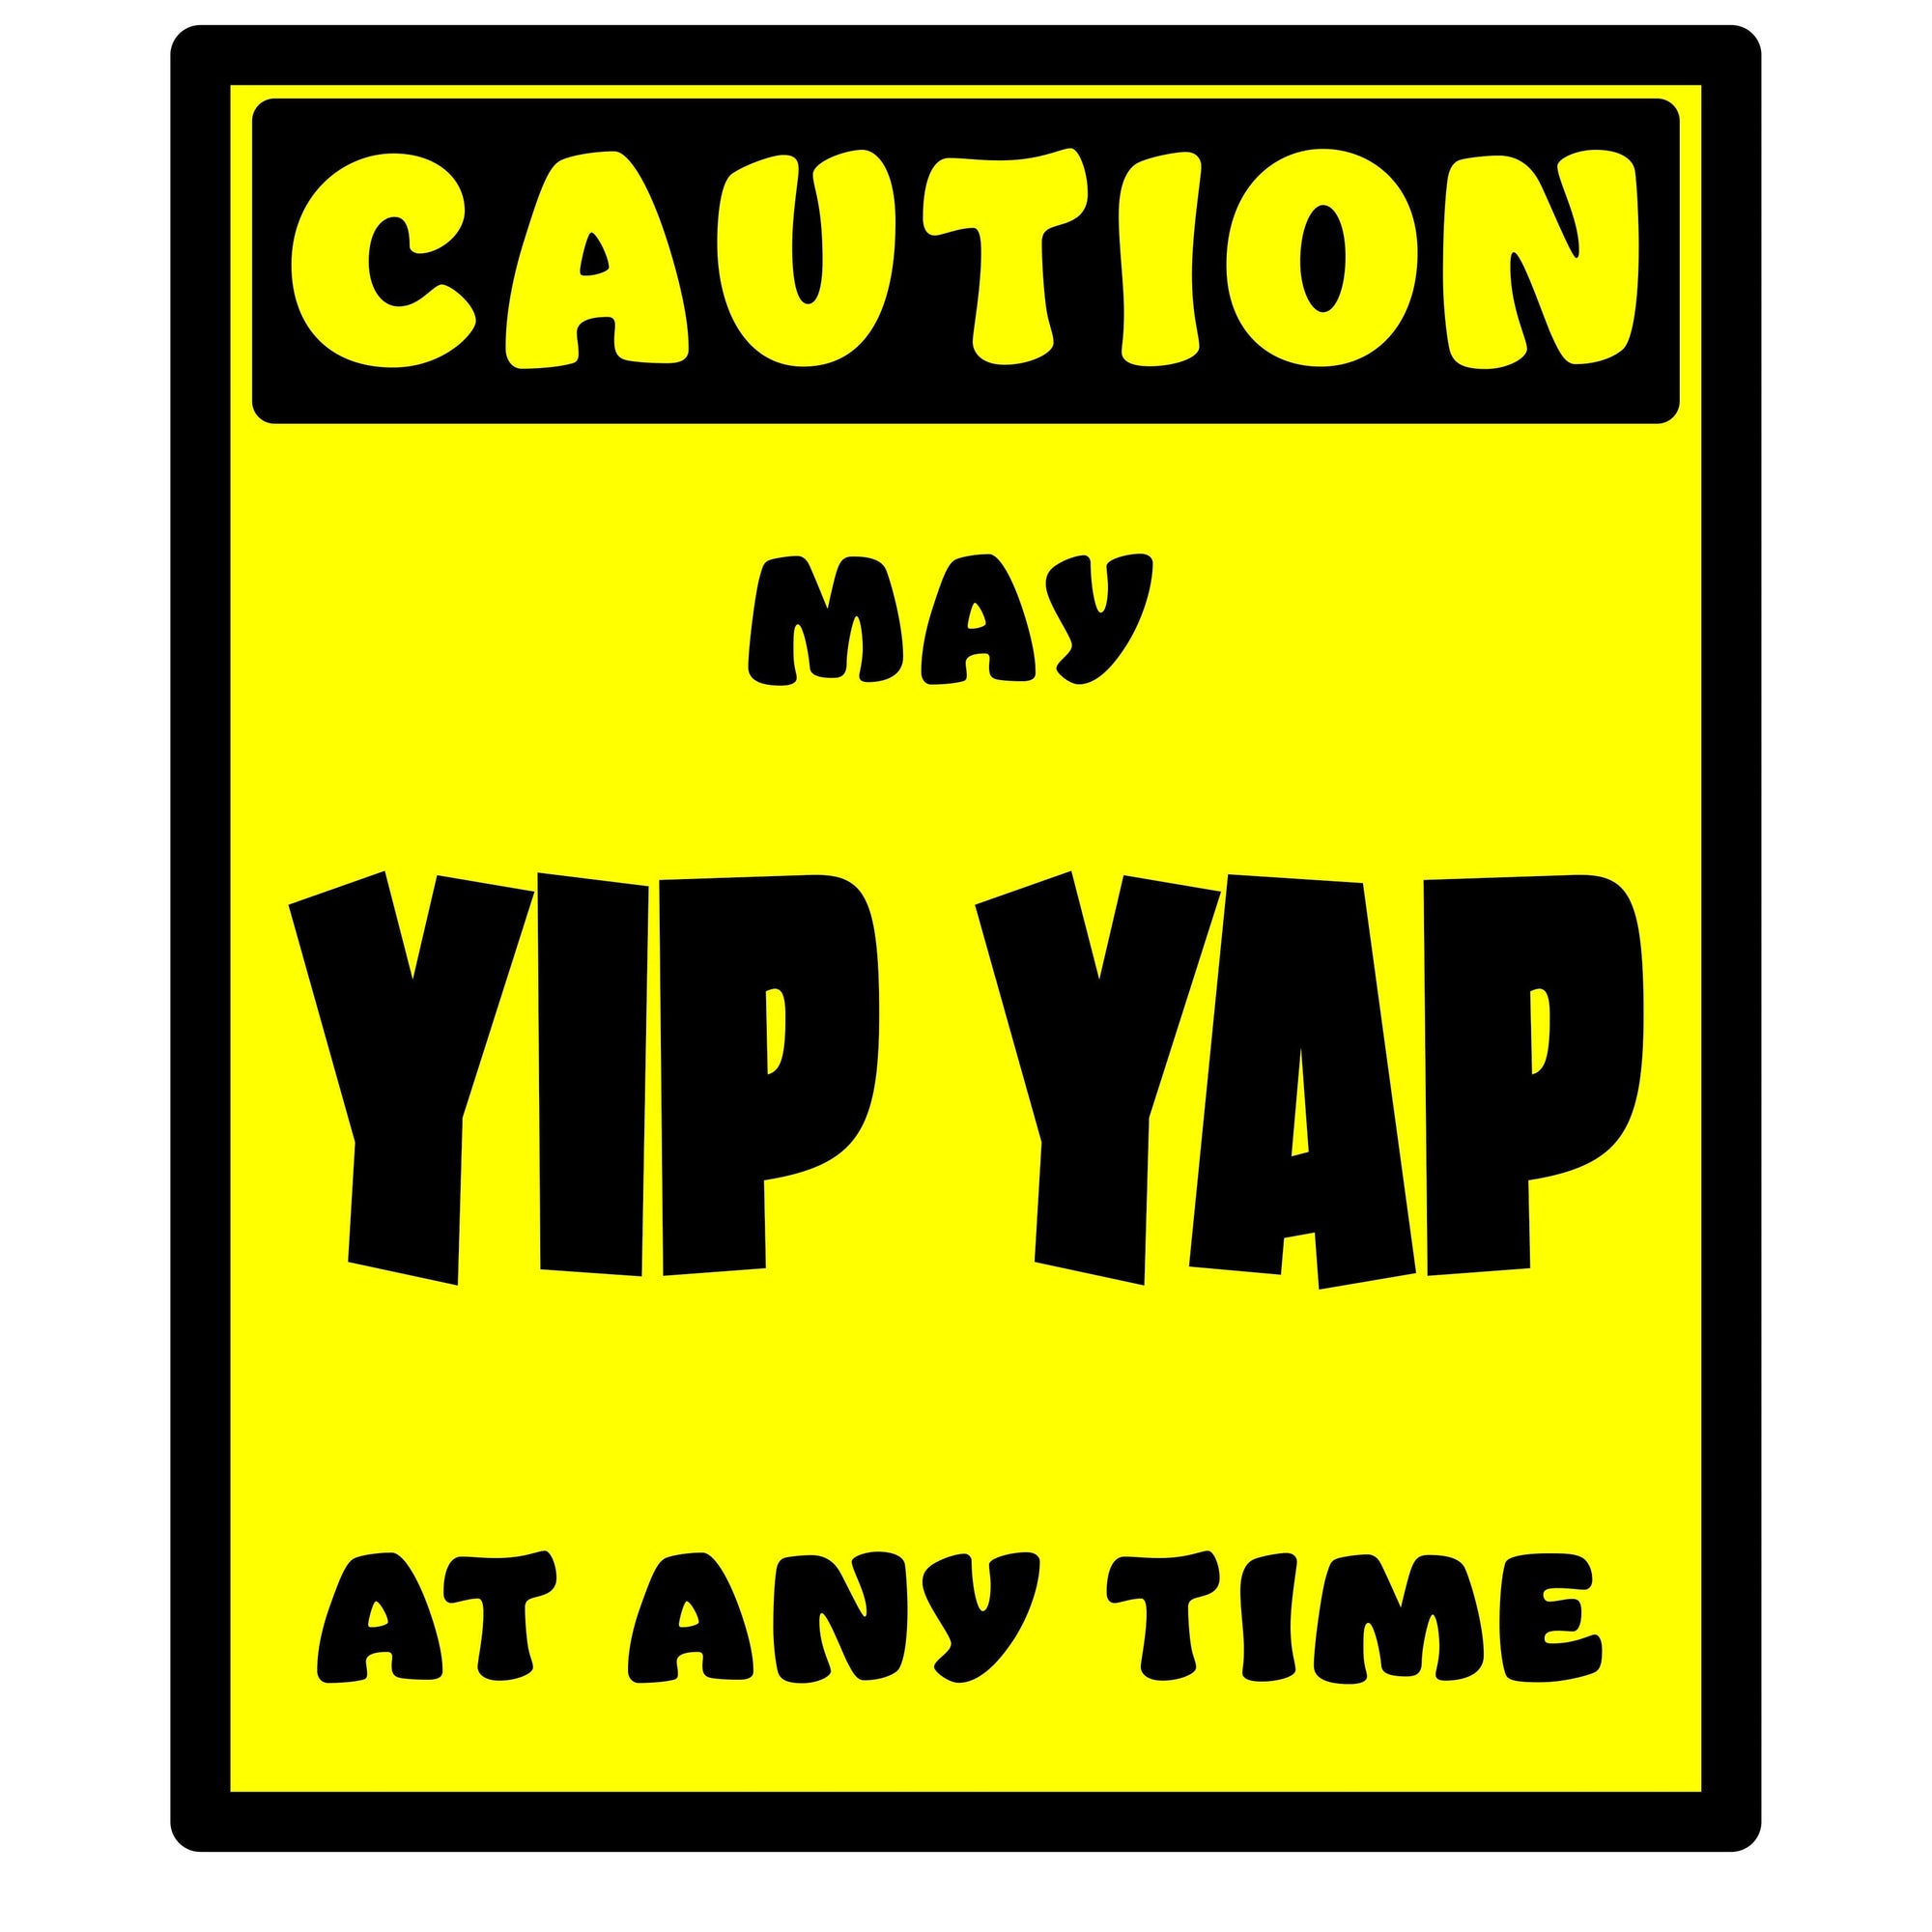 Whootorca - Caution! Series - Caution! May Yip Yap at any time!